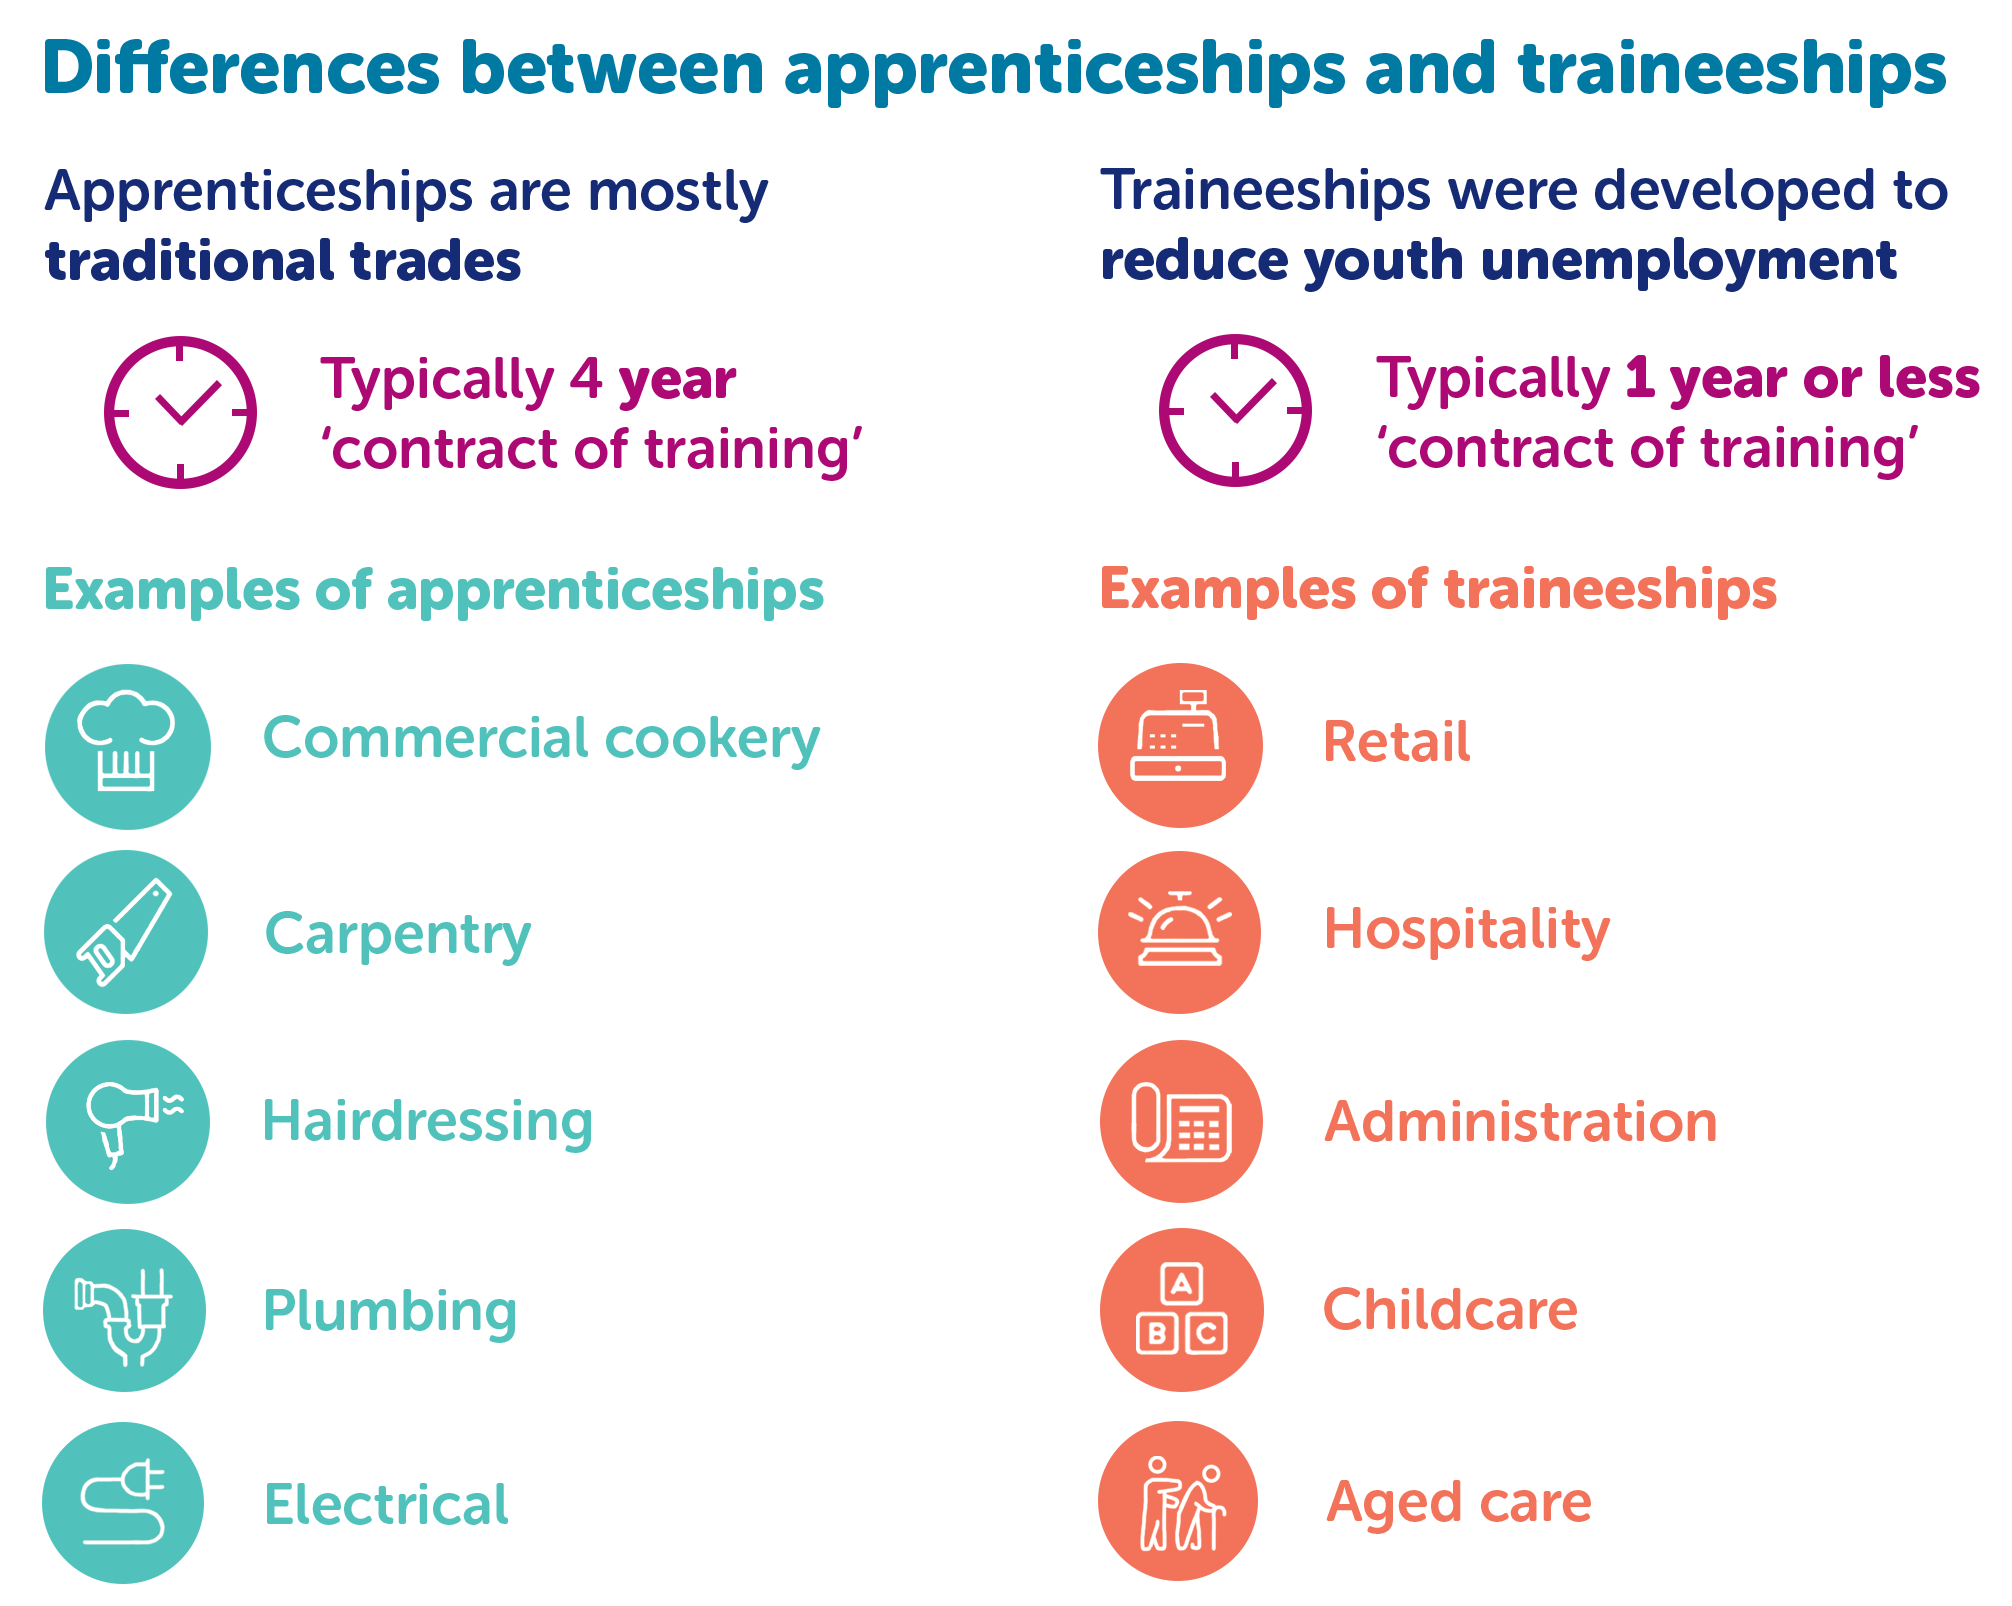 Differences between apprenticeships and traineeships.